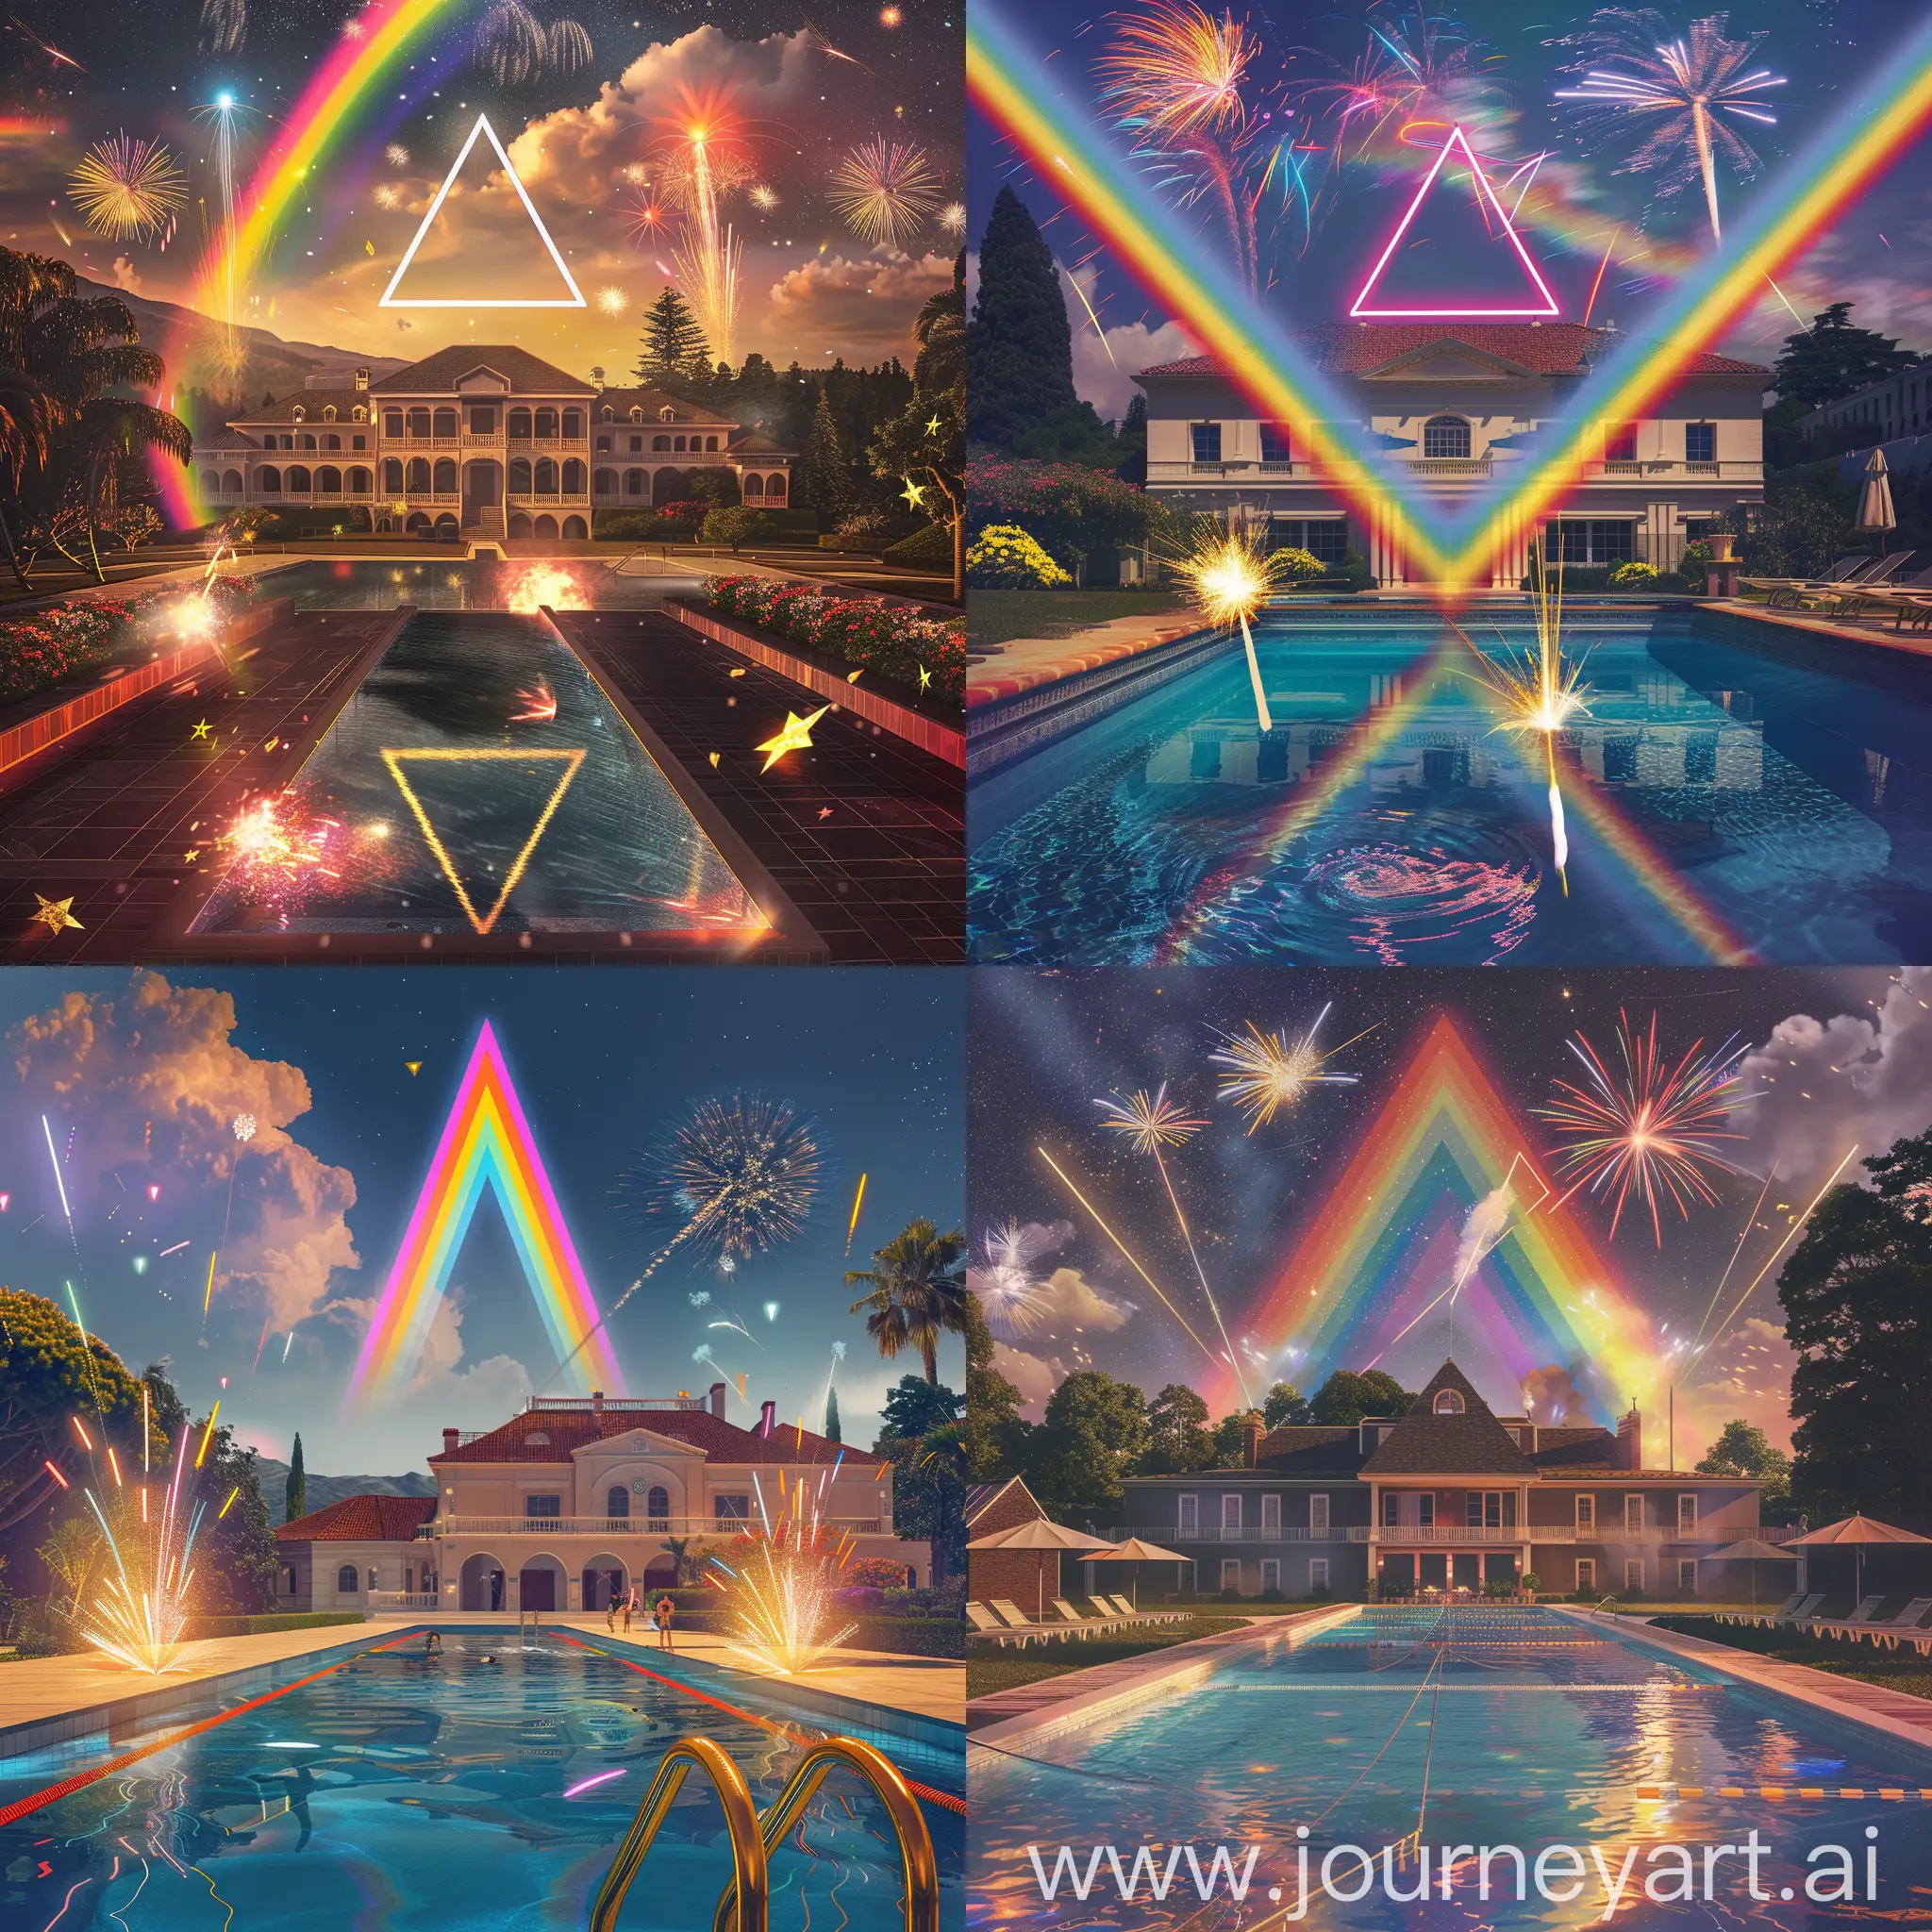  Create a funny memePRYSM Network, PRYSM Network launch party, swimming pool, mansion in the background, triangle rainbow in the sky and exploding fireworks